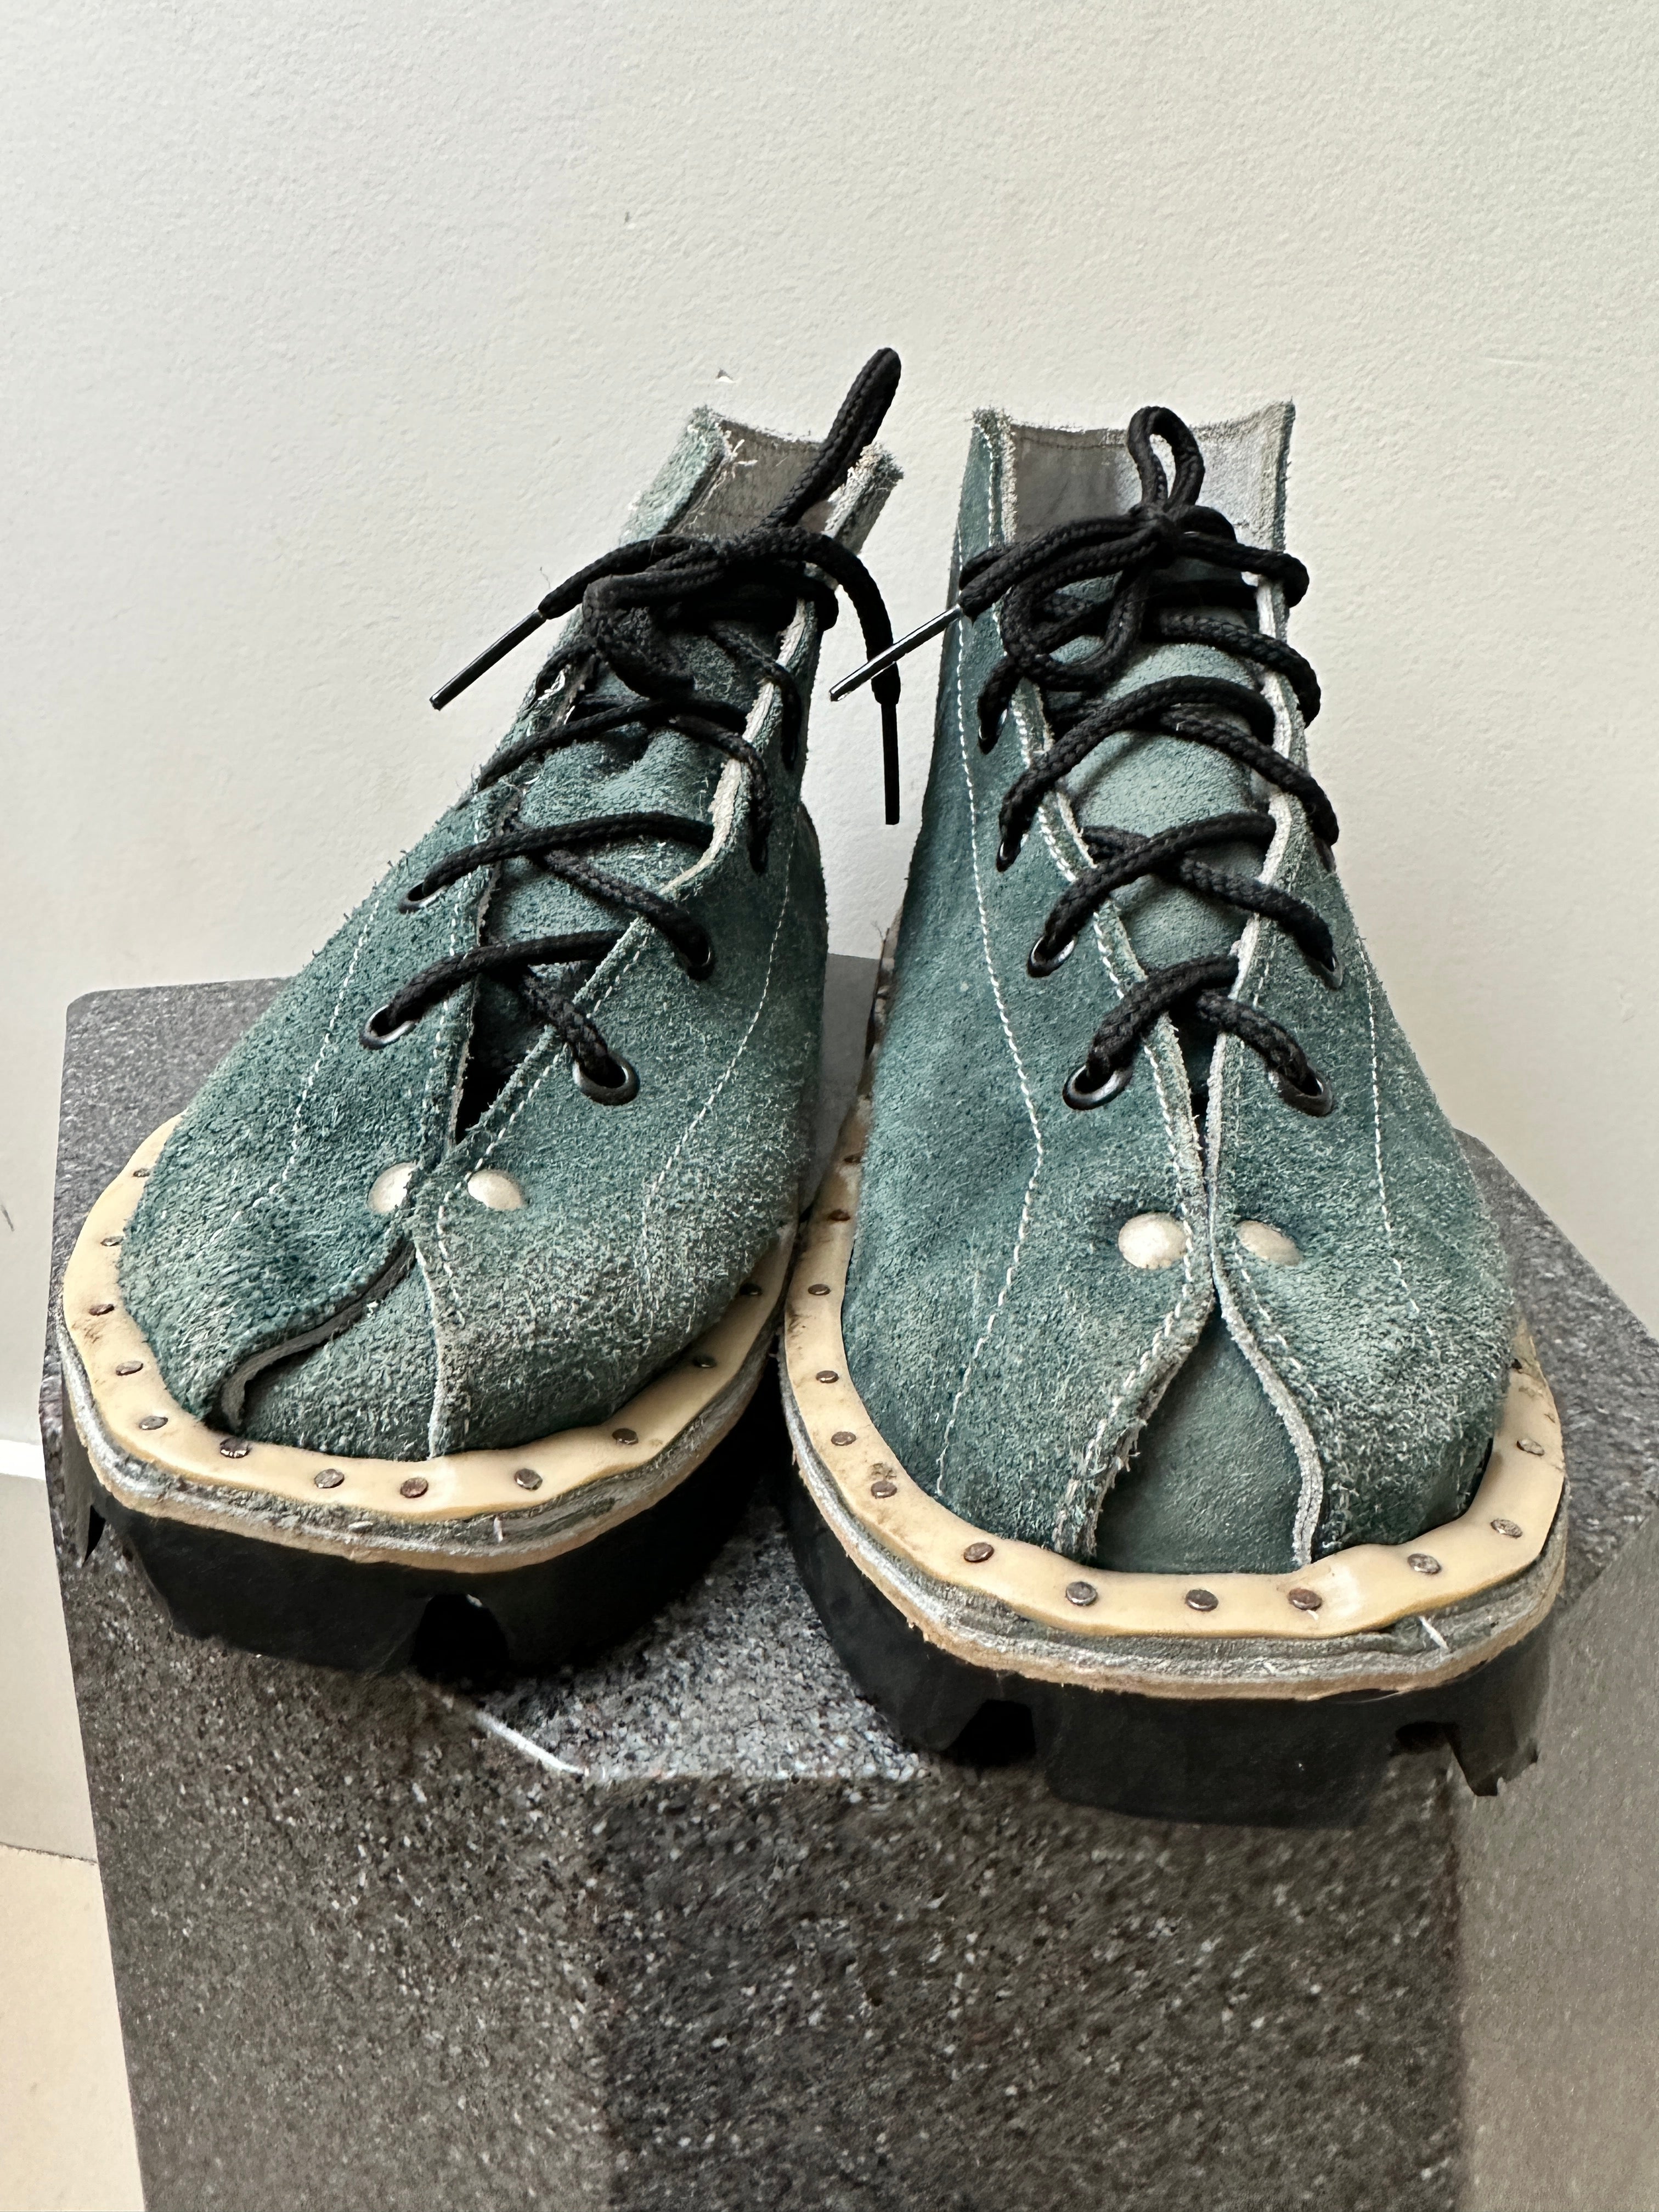 Future Nomads Shoes Teal / 42 Handmade Boots With Tyre Sole Teal